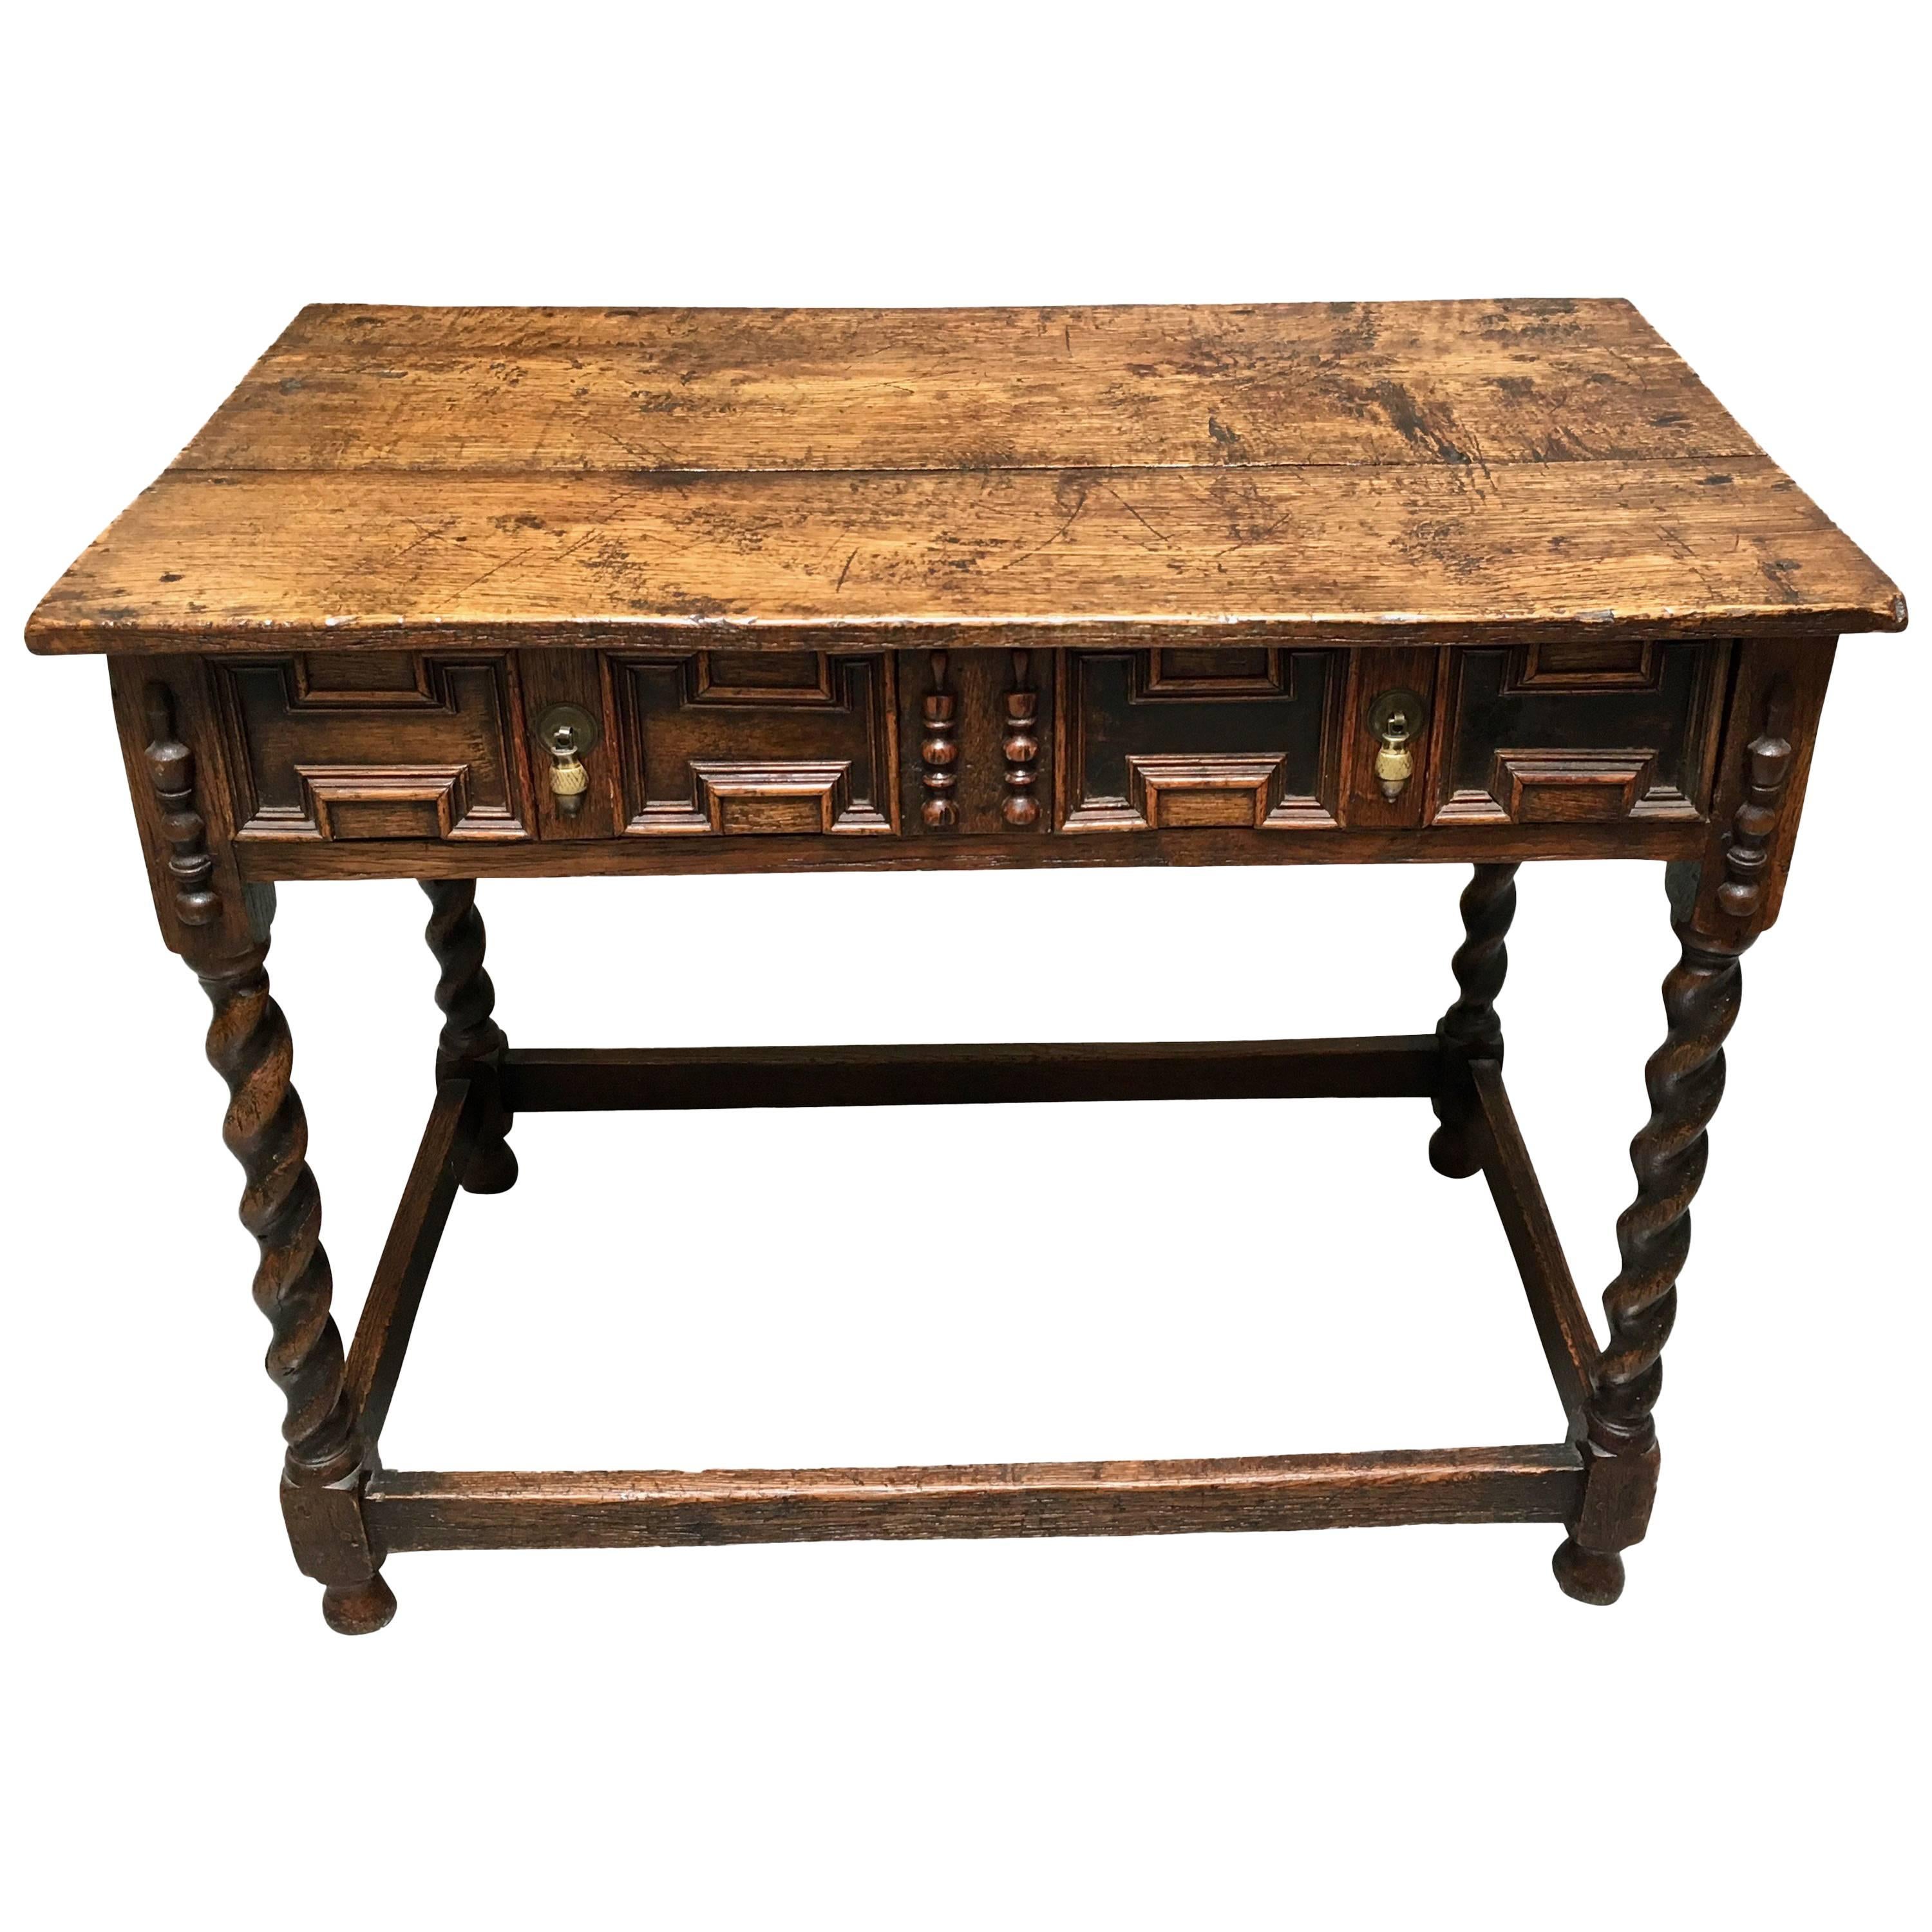 James II English Oak Side Table with Drawer